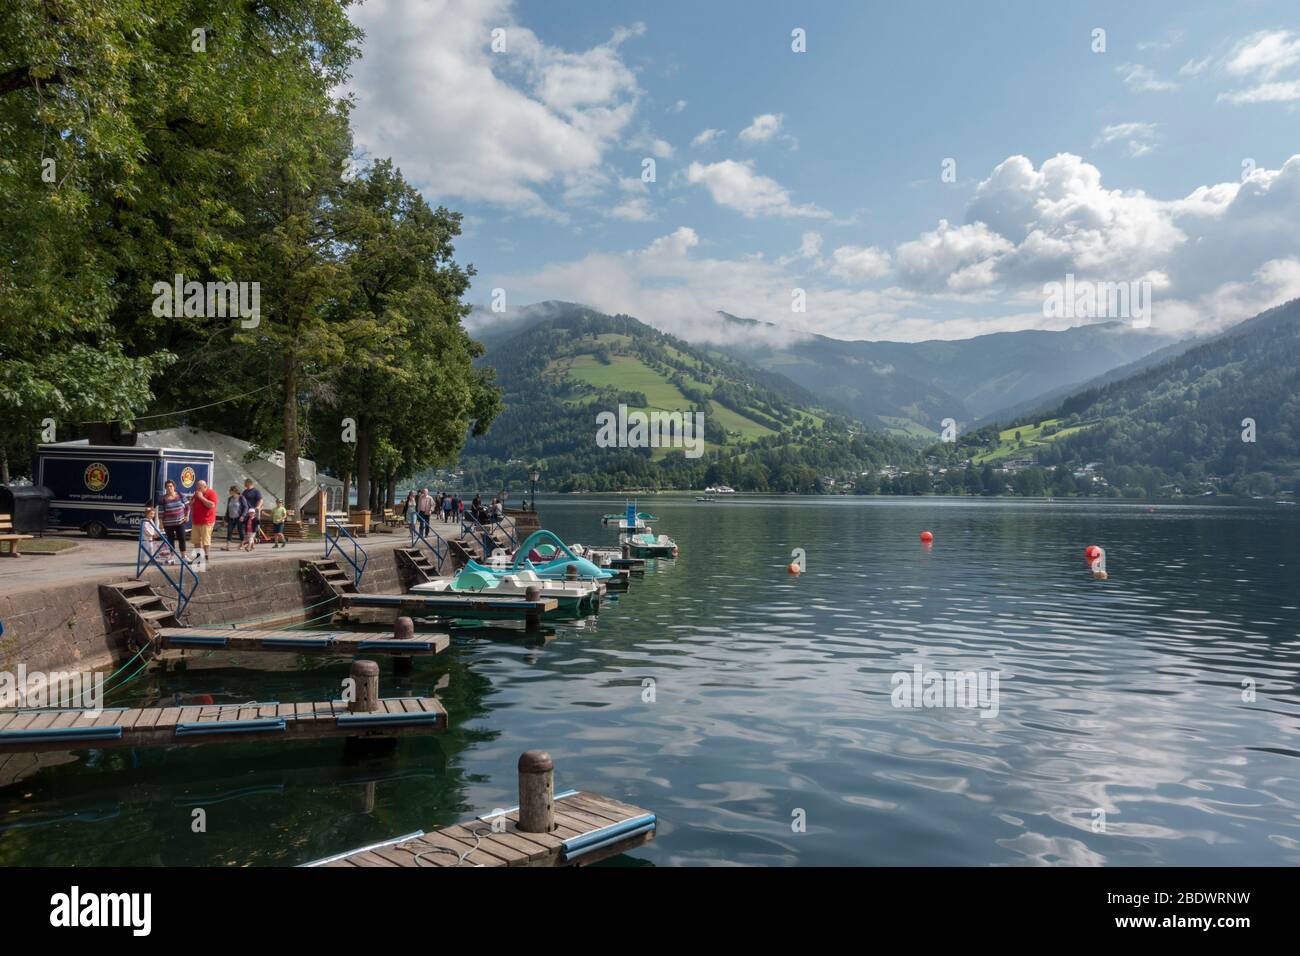 Lakeside view of Lake Zell, (Zeller See) in Zell Am See, Austria. Stock Photo